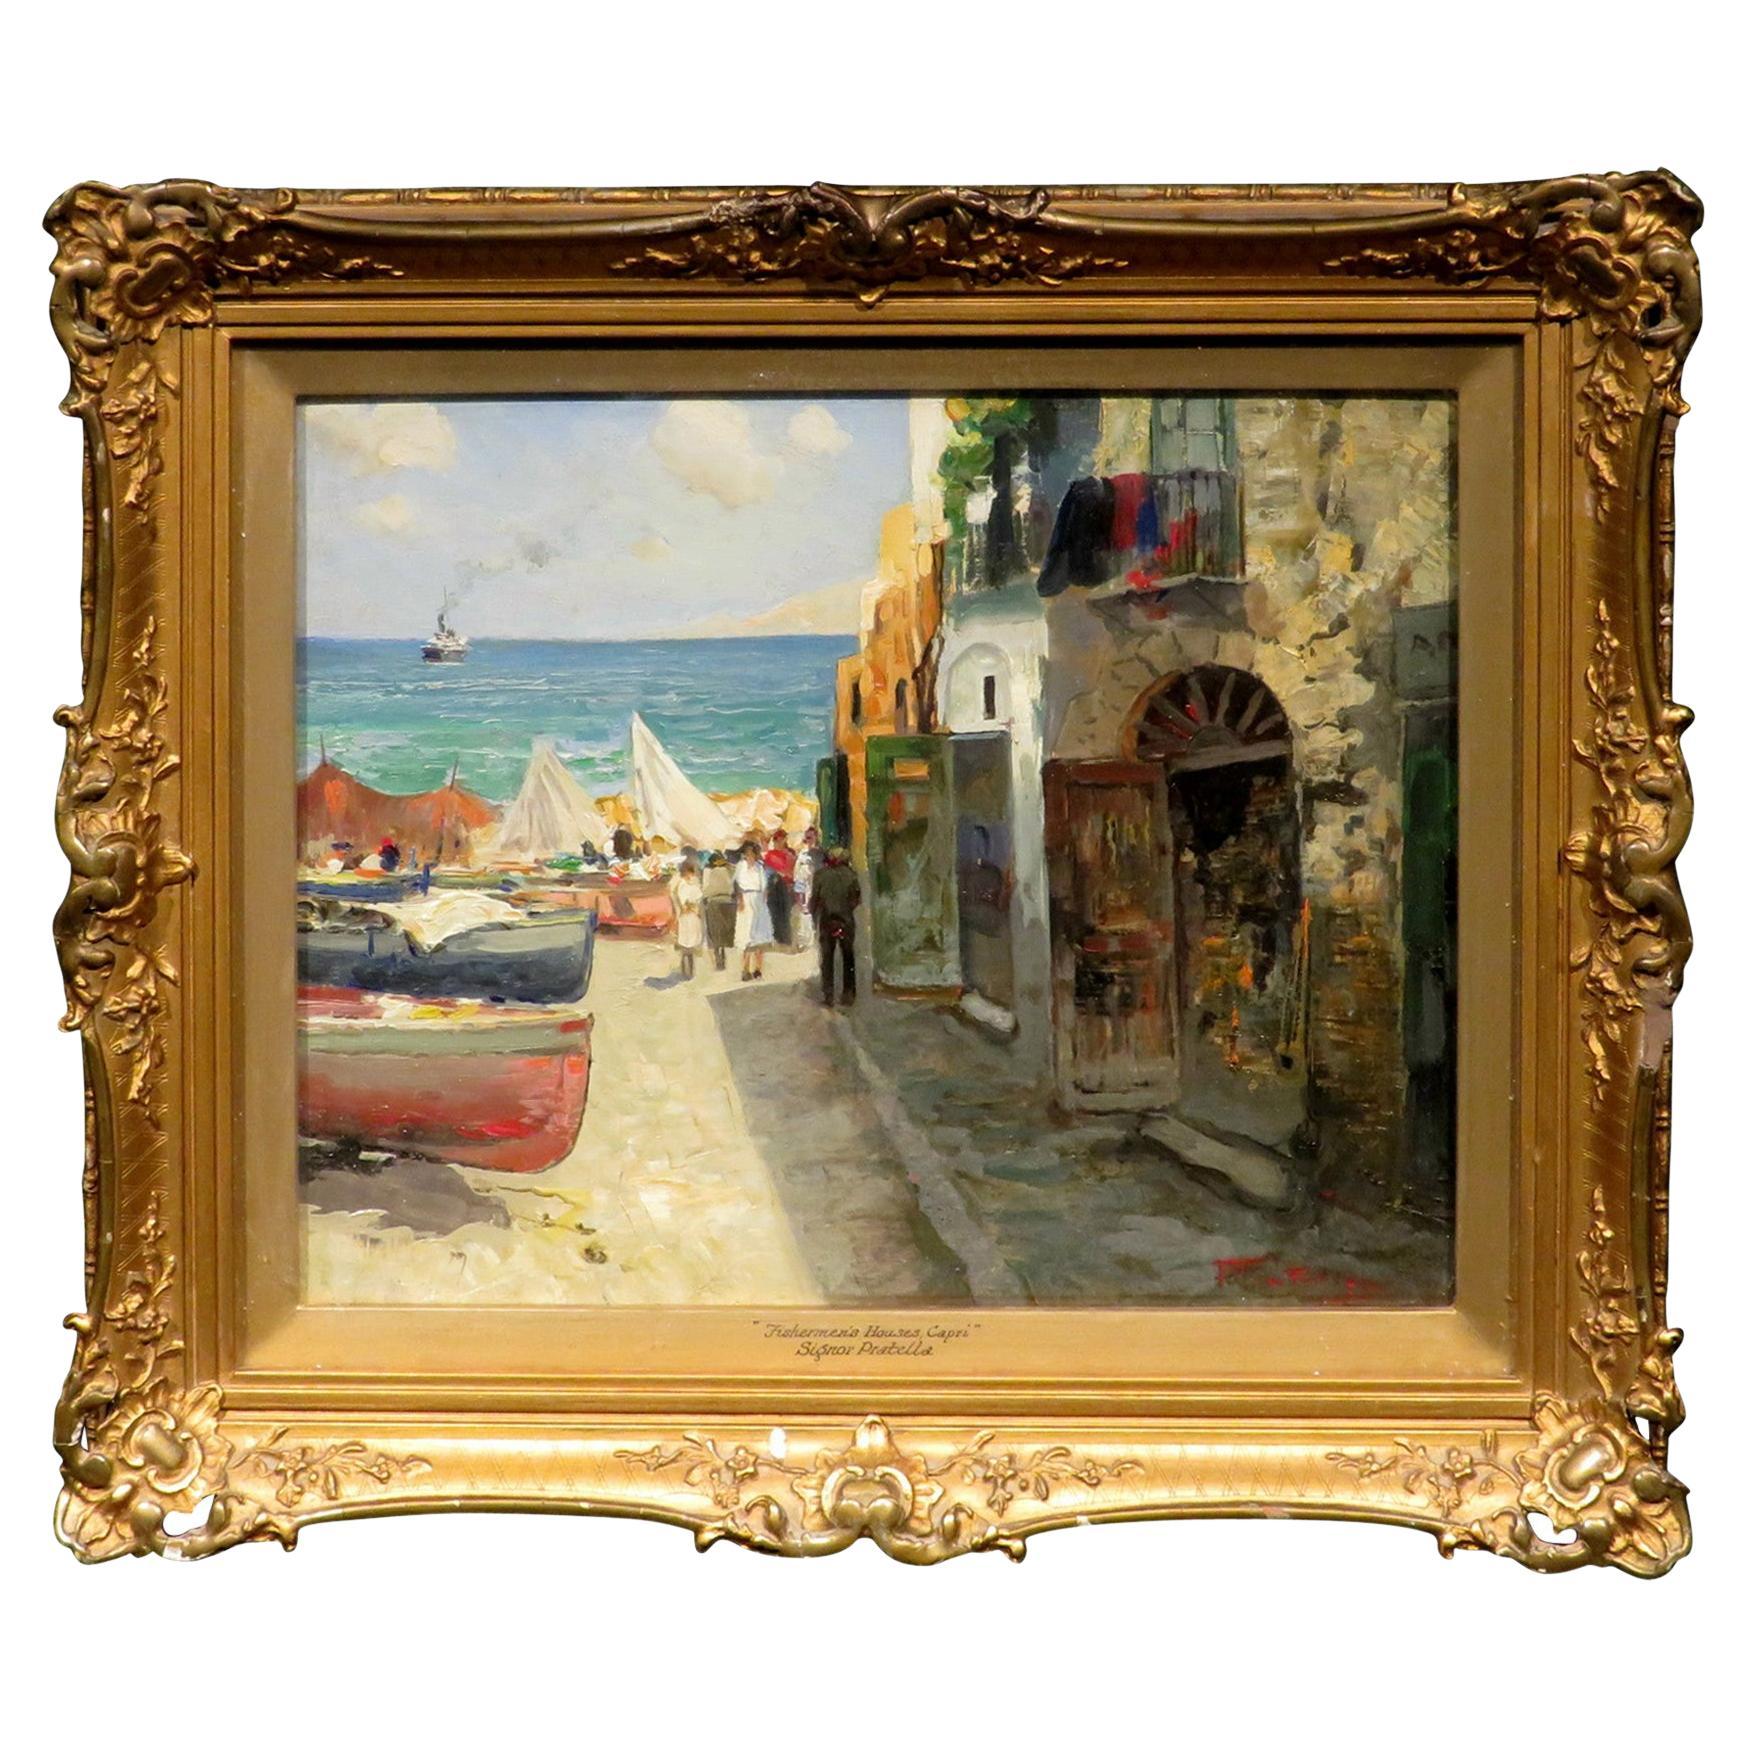 A very charming & finely executed impressionist harbour / coastal view titled 'Fishermans Houses, Capri' by noted 20th century Italian impressionist artist, Paolo Pratella (1892-1980).
Oil on wood panel, signed bottom right and set within its